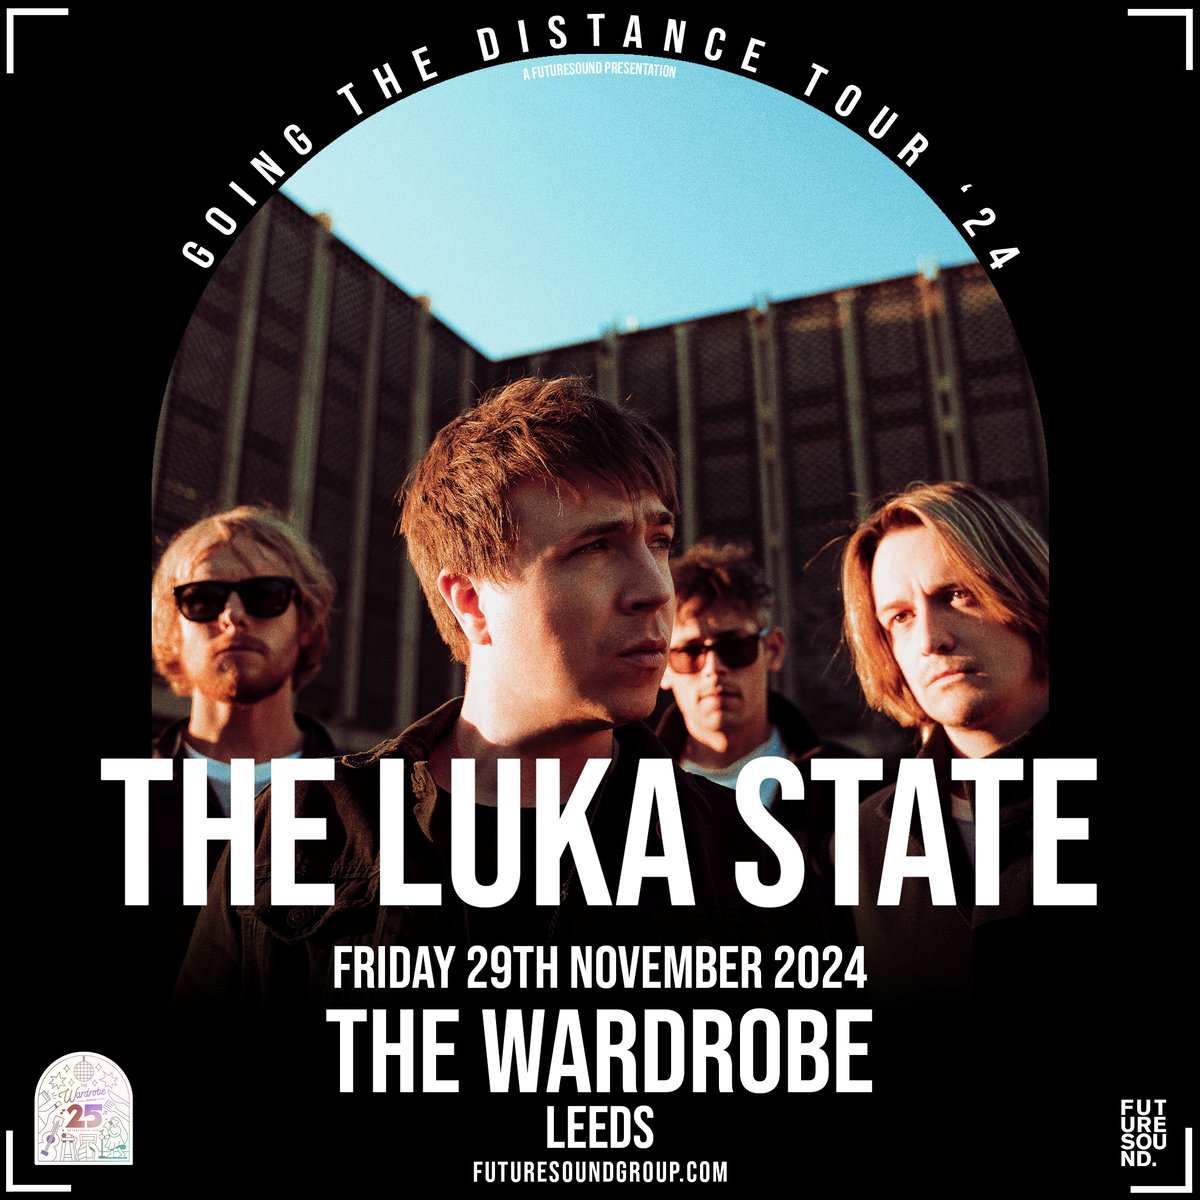 Rising Indie-rock band @TheLukaState bring their 'Going The Distance Tour' to The Wardrobe Leeds 29th November! Tickets on sale Friday at 10am! Tickets from 🎟️👉 thewardrobe.co.uk